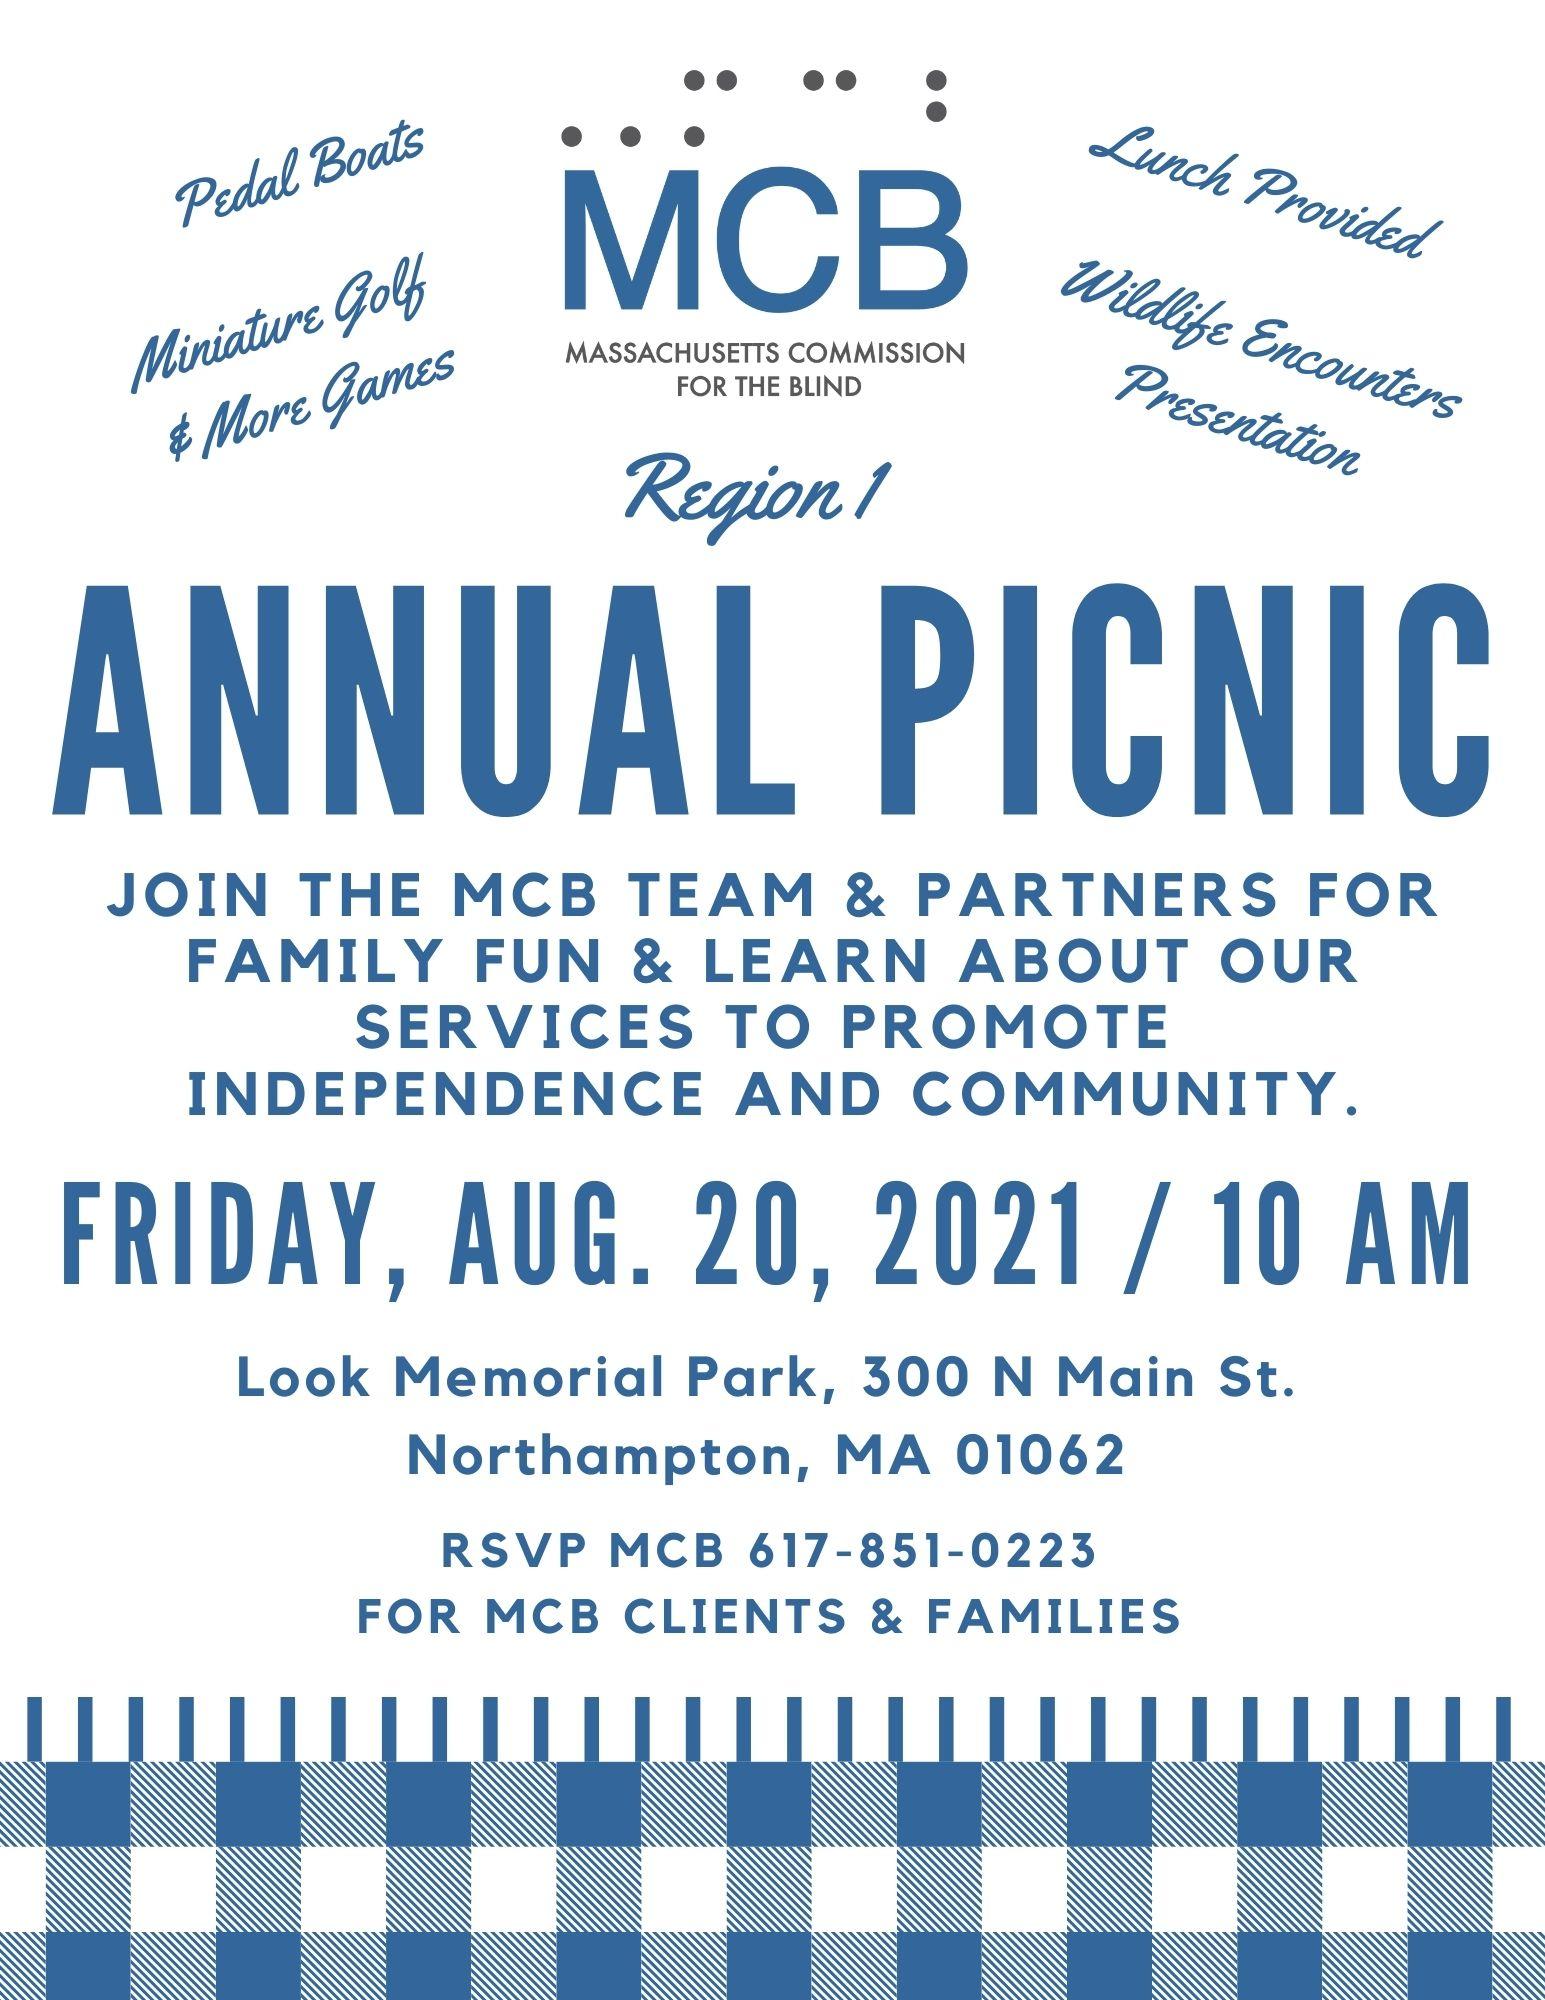 MCB Annual Picnic Flyer, Blue & White Check, Friday, August 20, 2021 from 10 am to 3 pm EST at Look Park in Northampton, MA. RSVP to 617-851-0223.